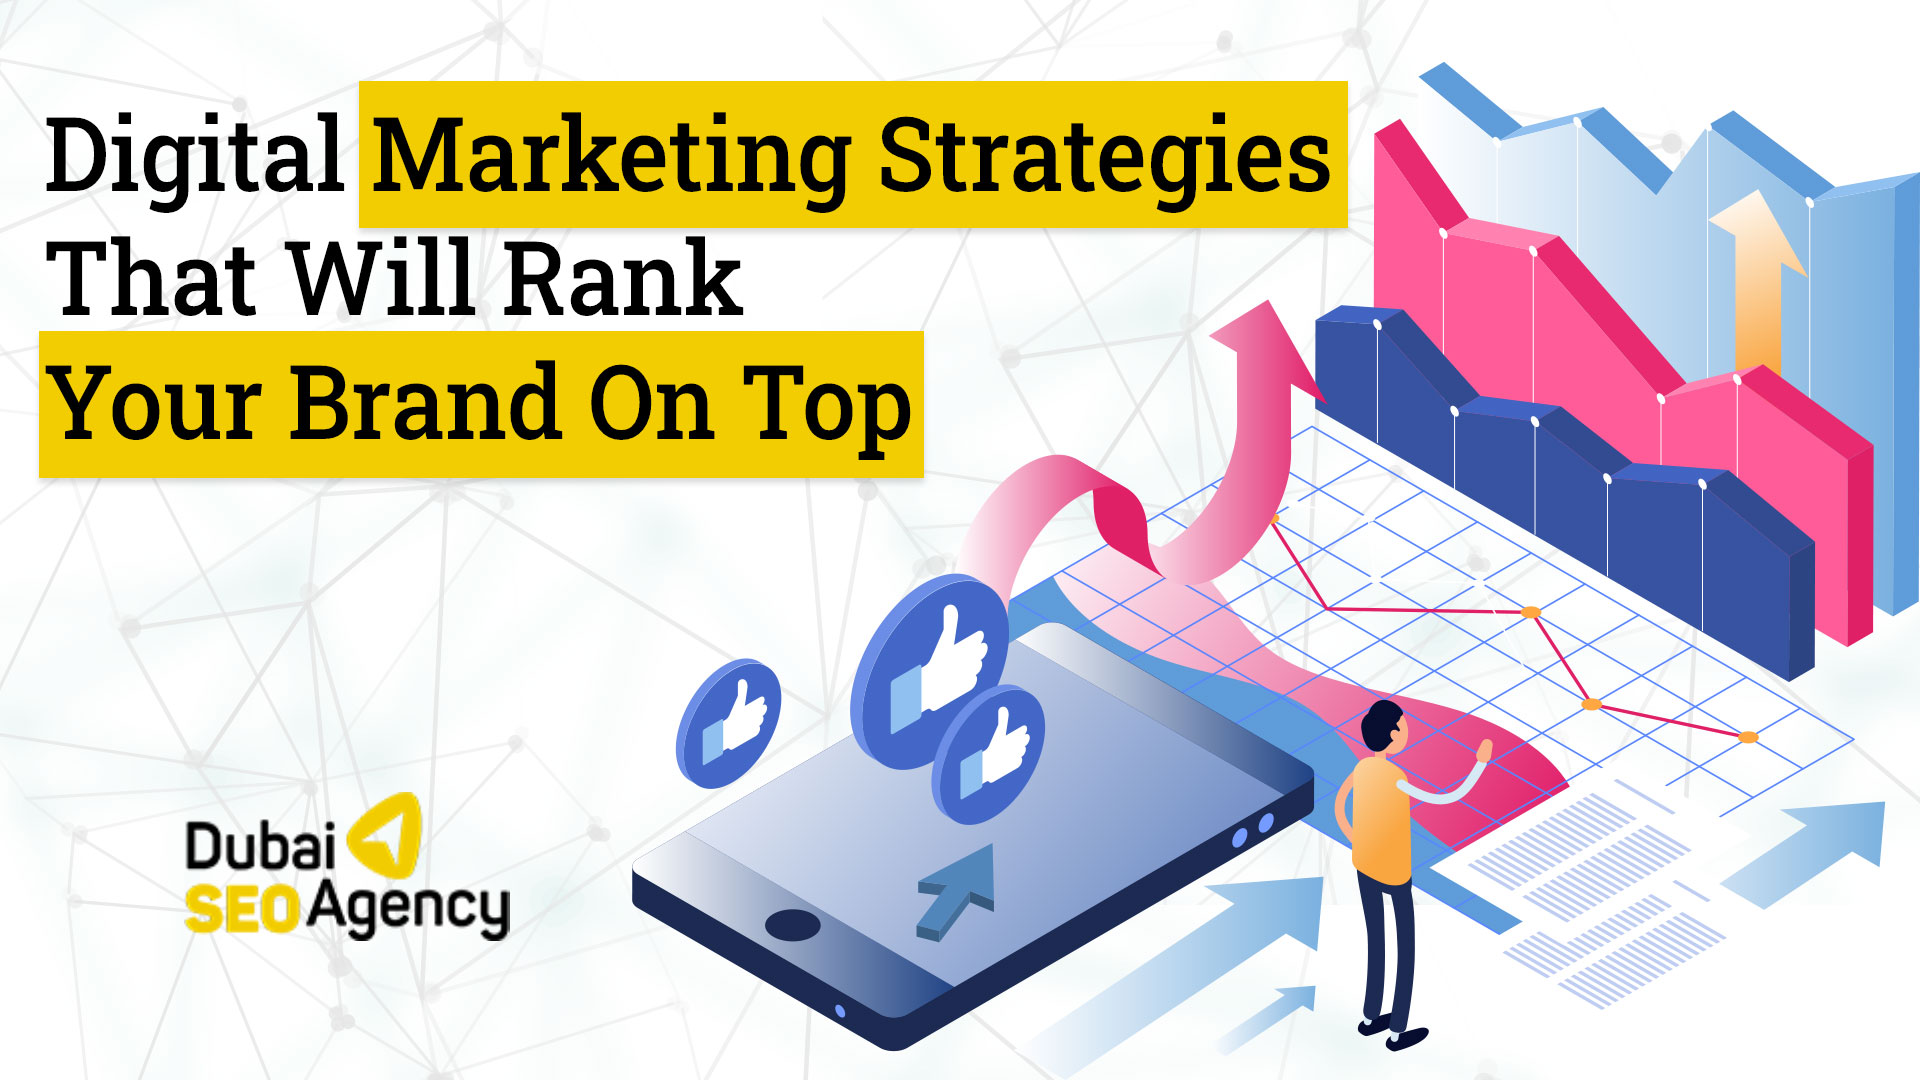 Digital marketing strategies that will rank your brand on top